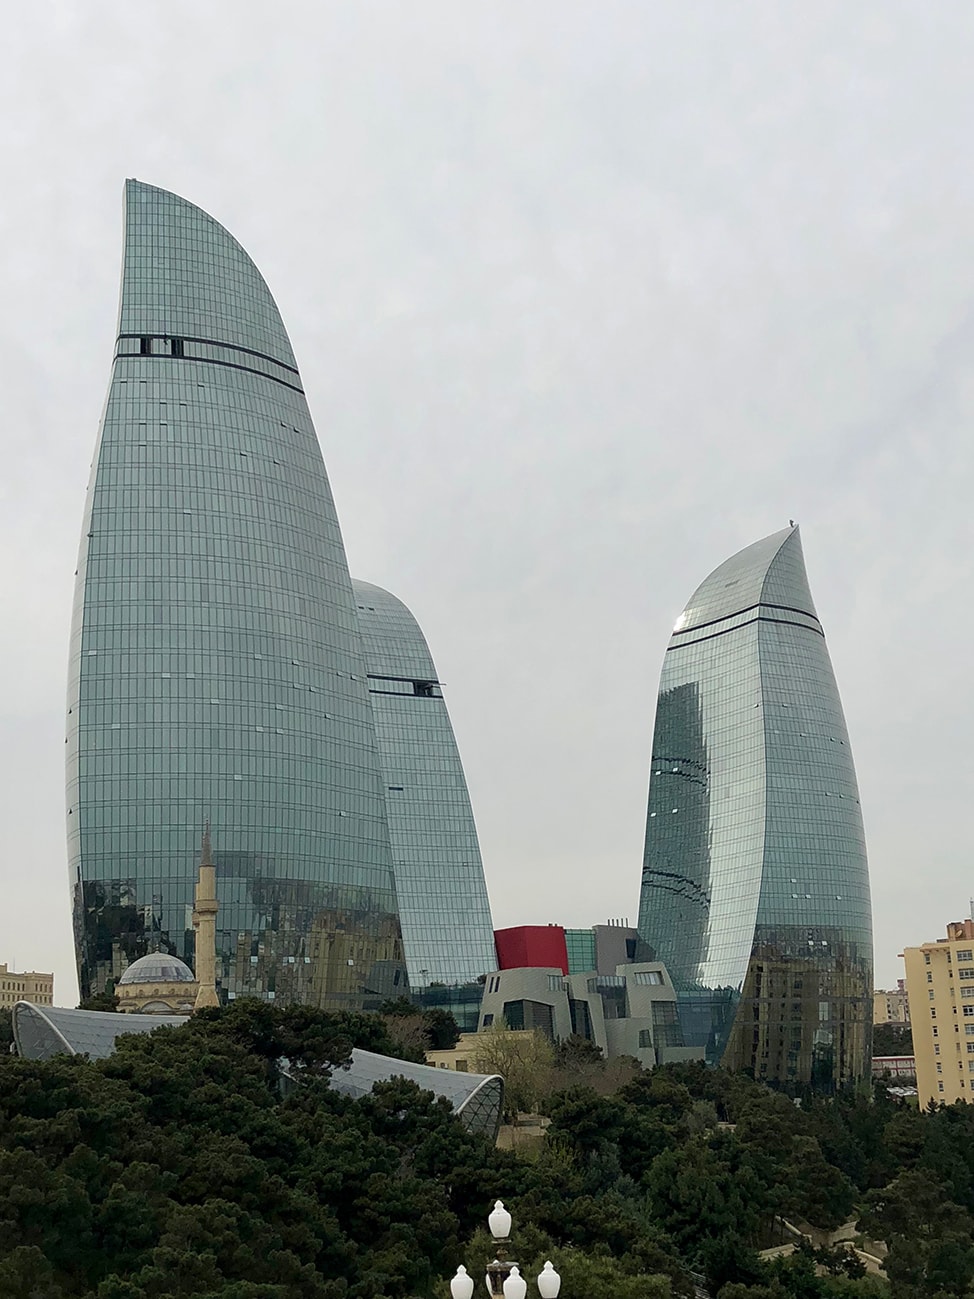 View of the 3 Flame Towers